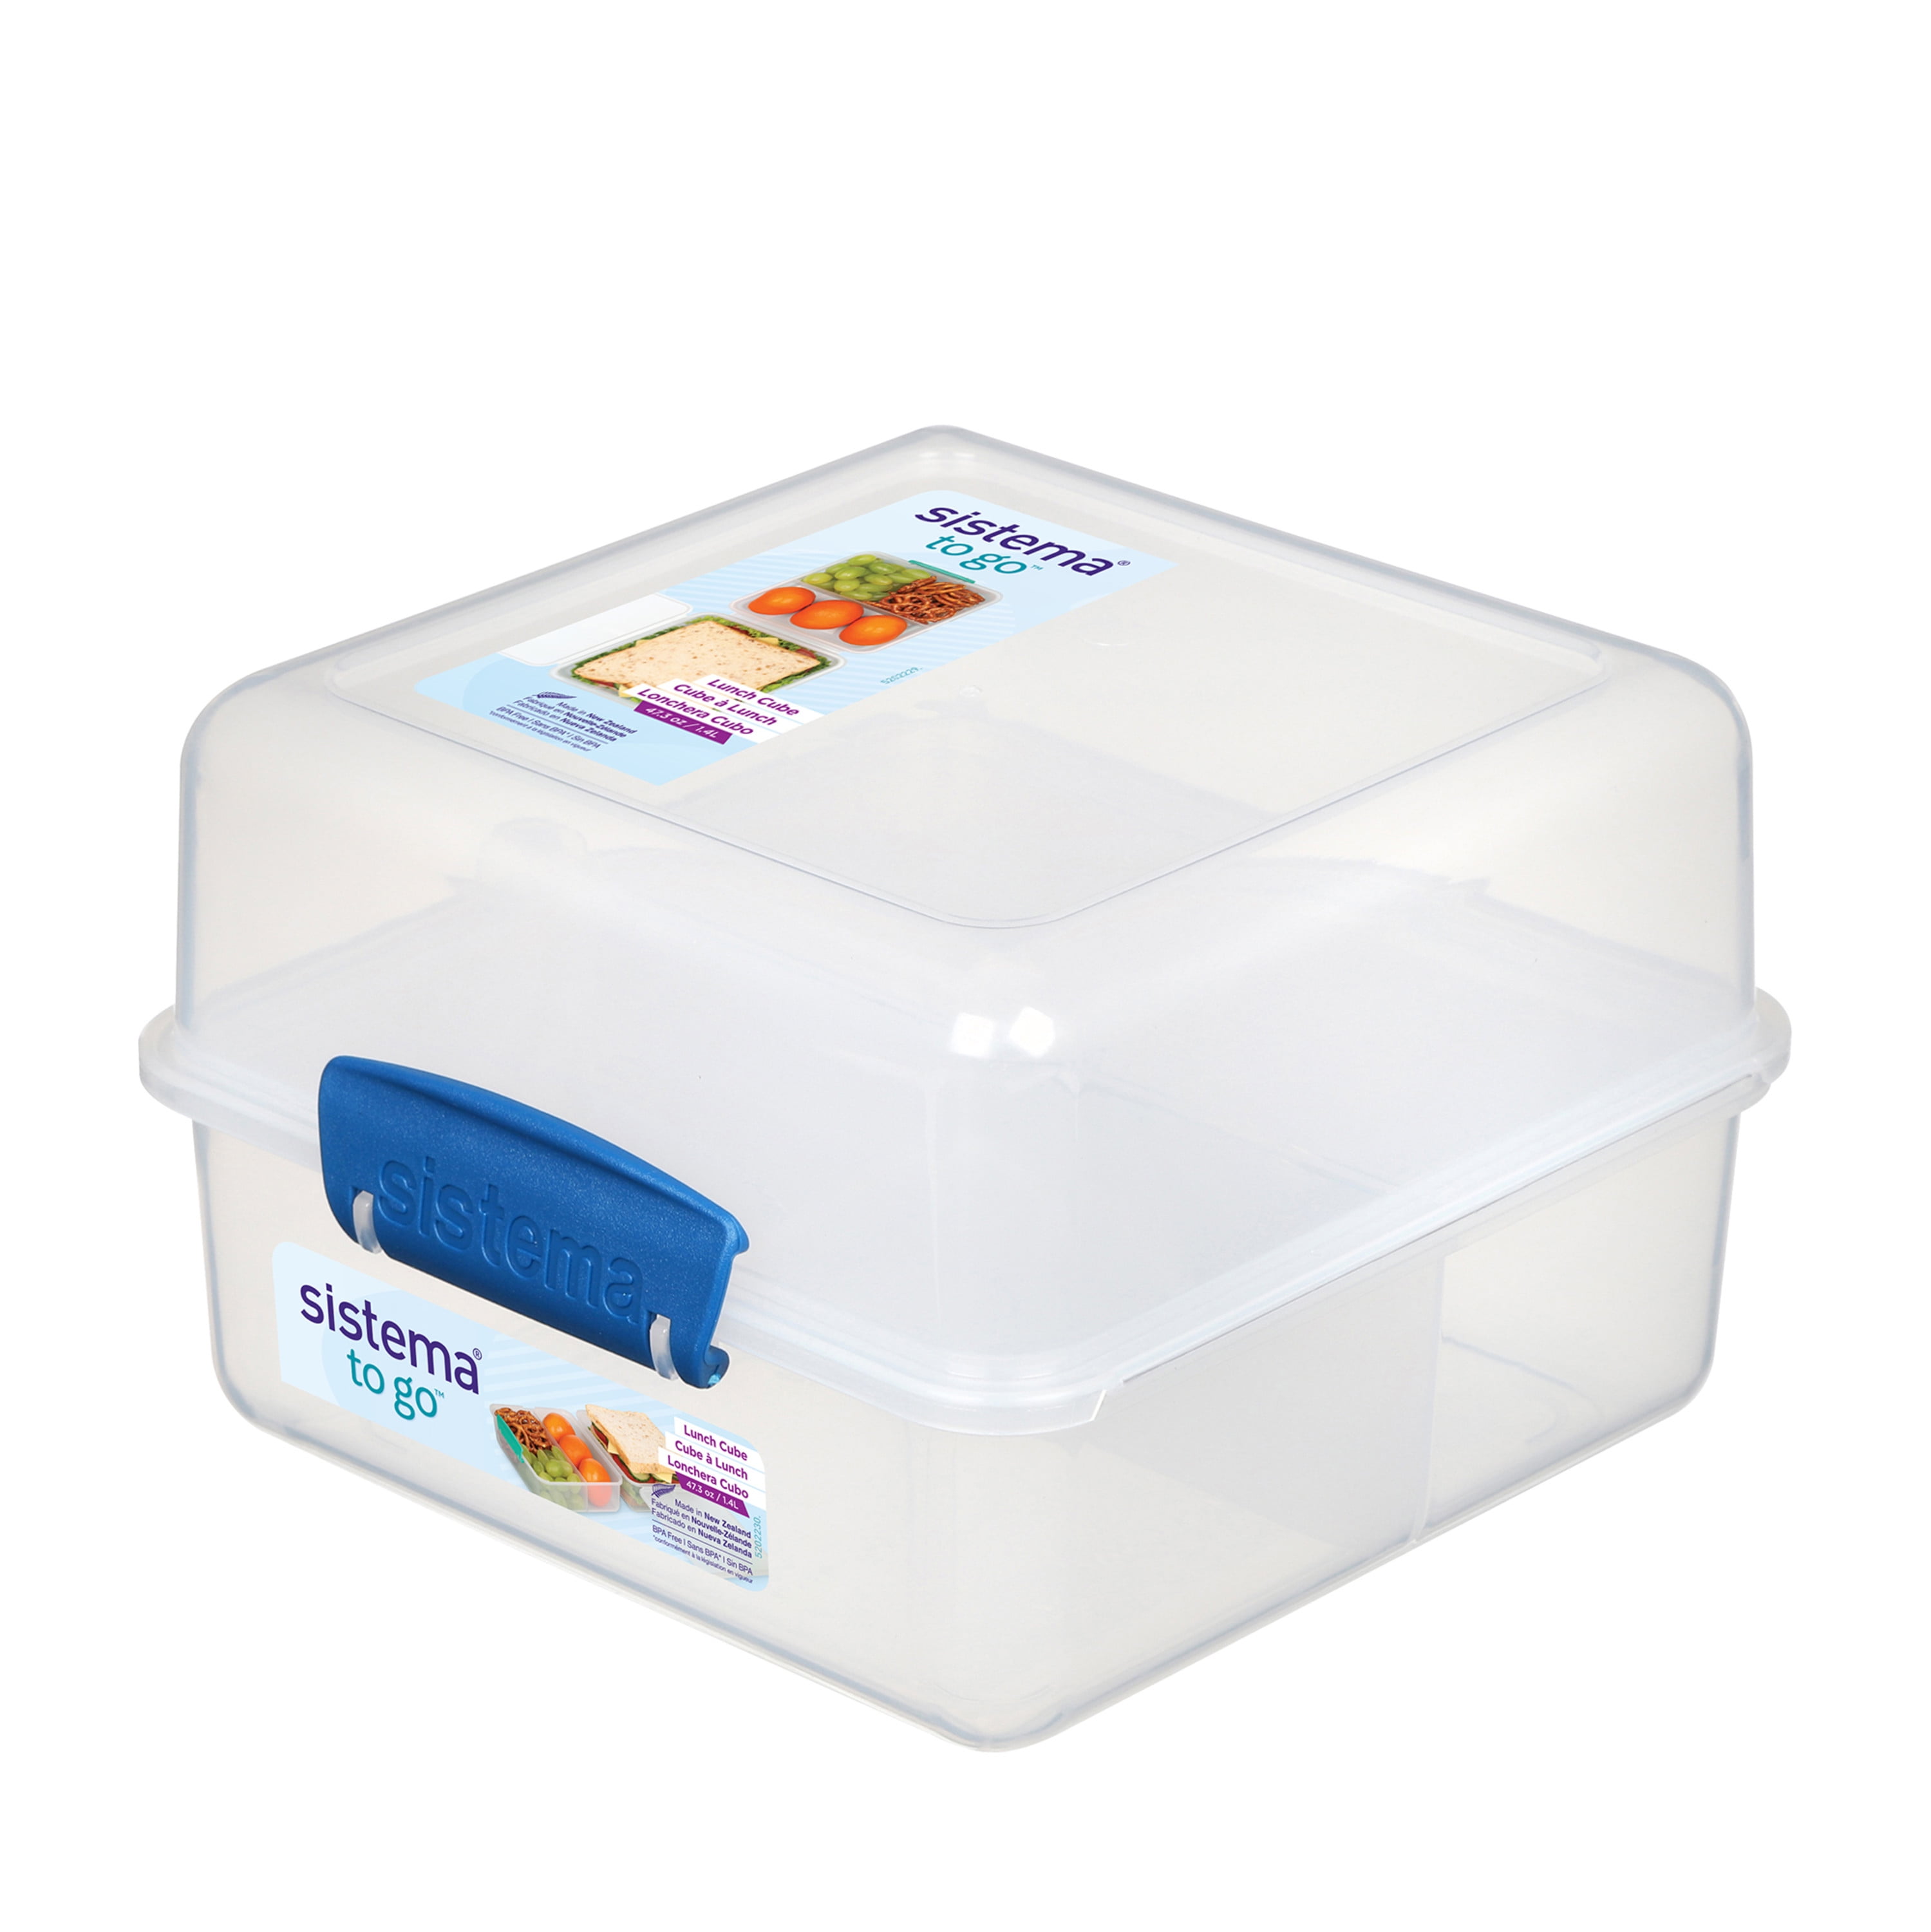 Lunch Cube Box with top Sandwich Compartment and 3 Lower Food Storage Bins